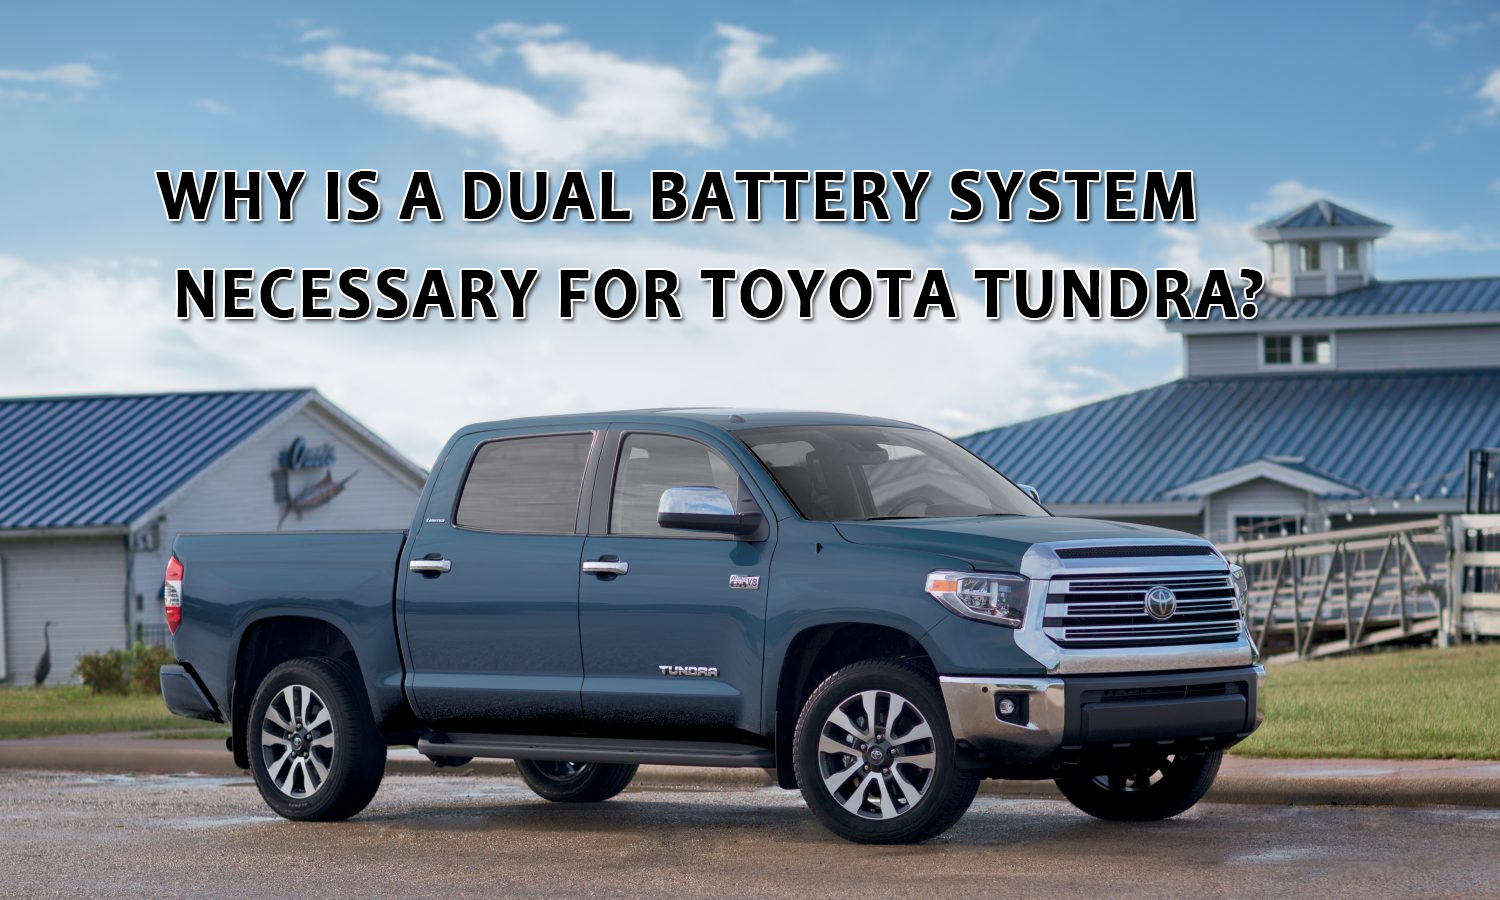 Why is a Dual Battery System Necessary for Toyota Tundra?